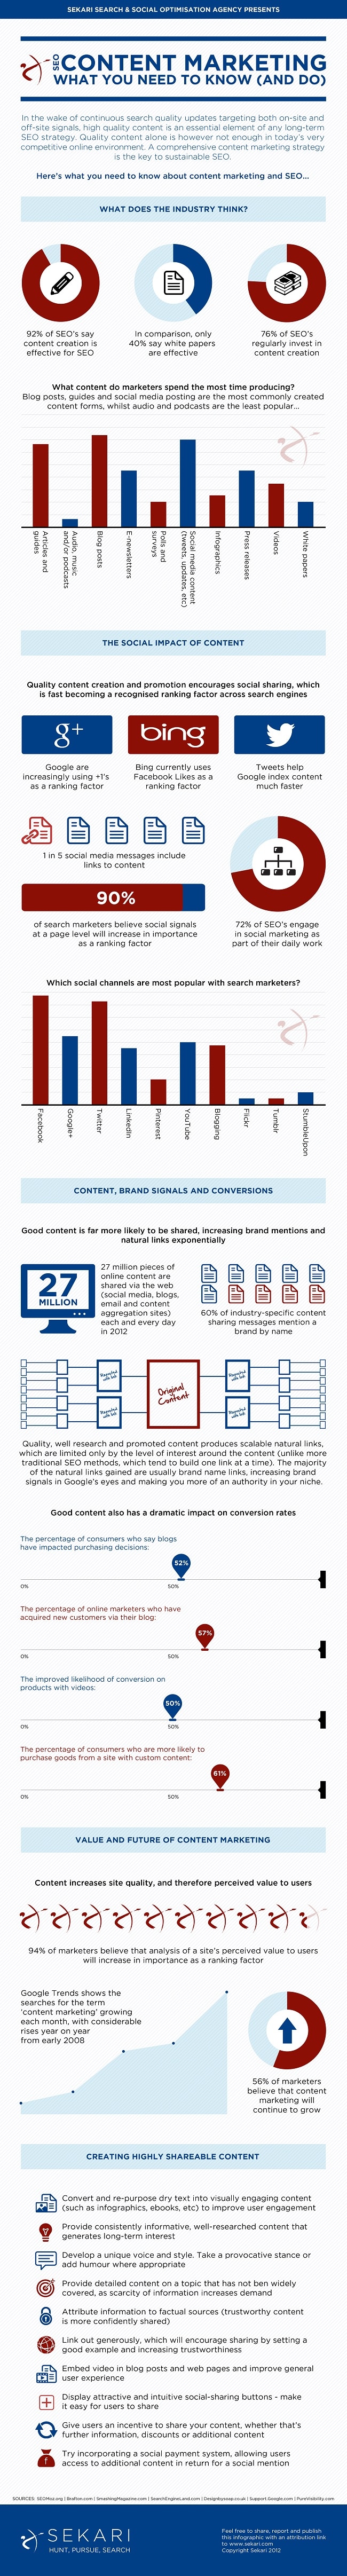 Content Marketing: What To Know & Do To Master The Skill [Infographic]